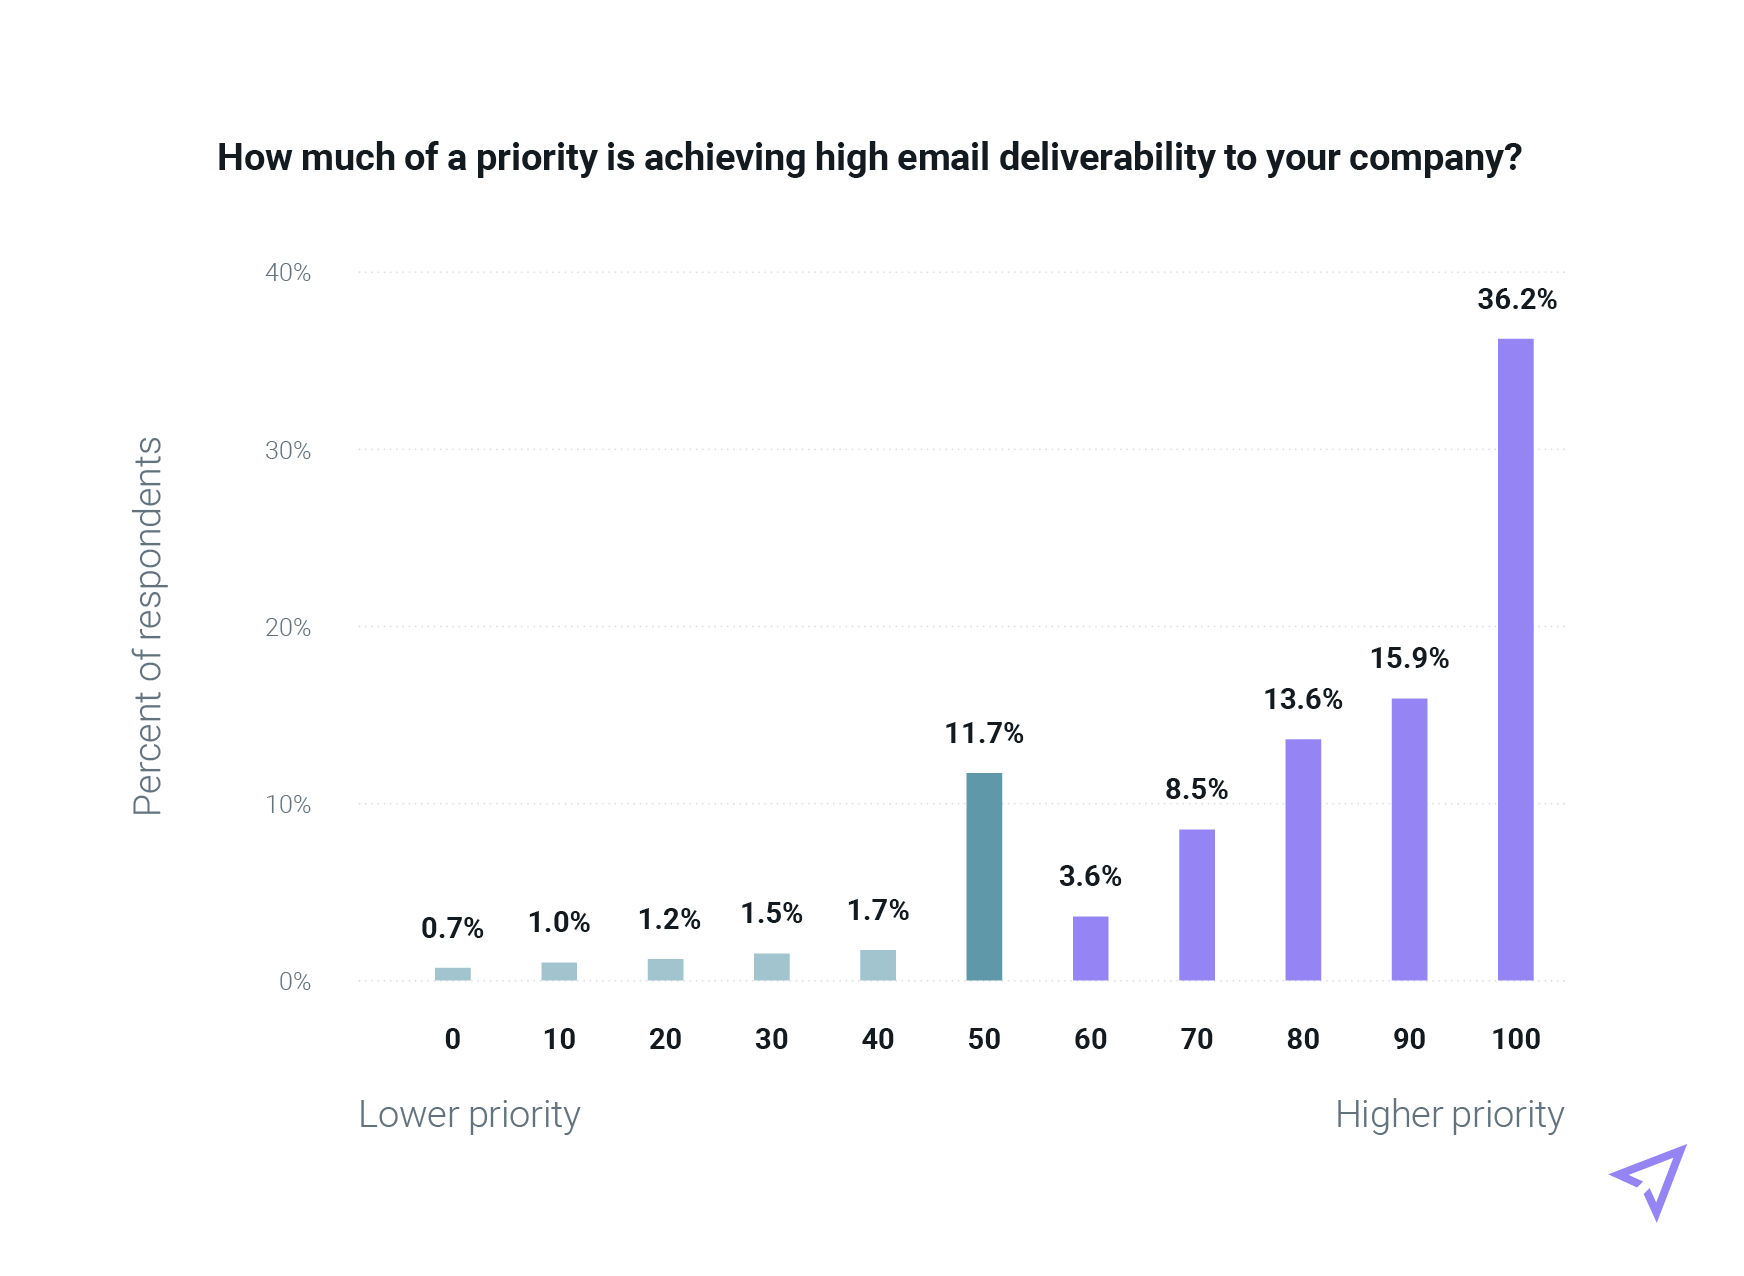 A table ranking where marketers prioritize email deliverability on a scale of 0-100